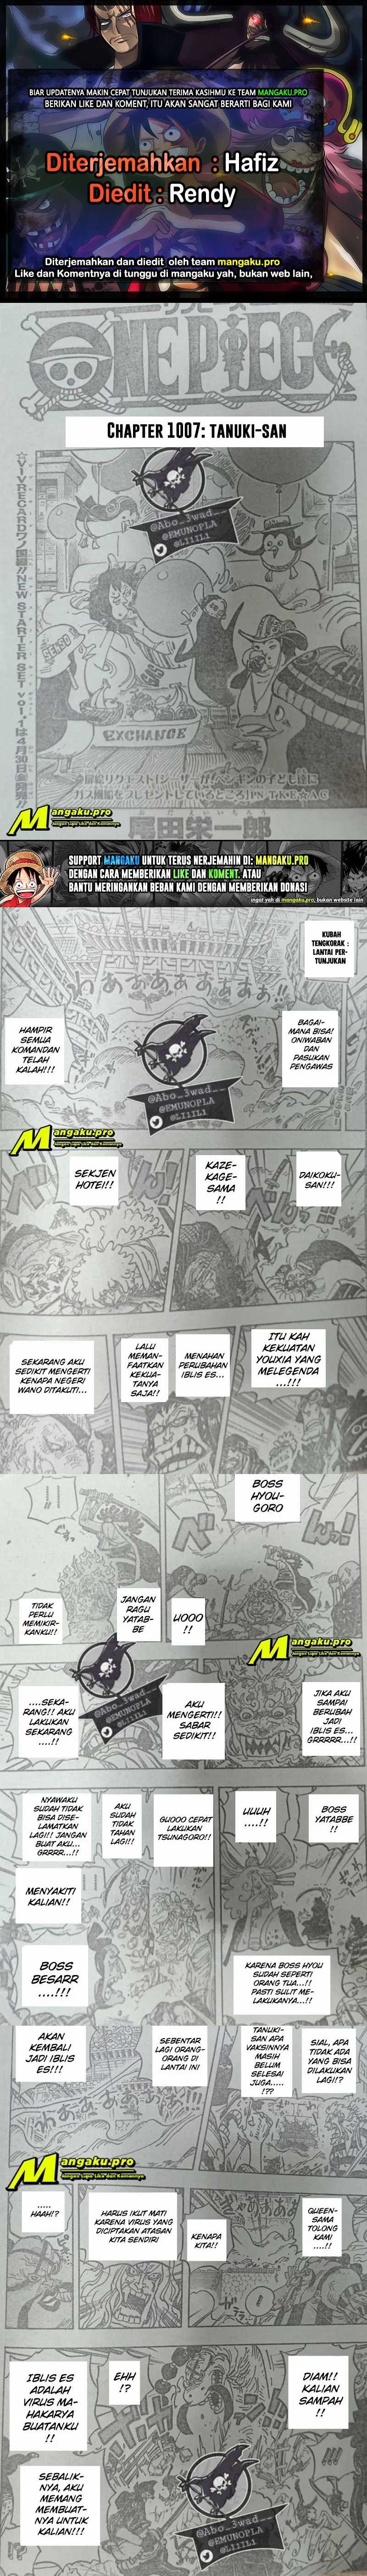 One Piece Chapter 1007 lq